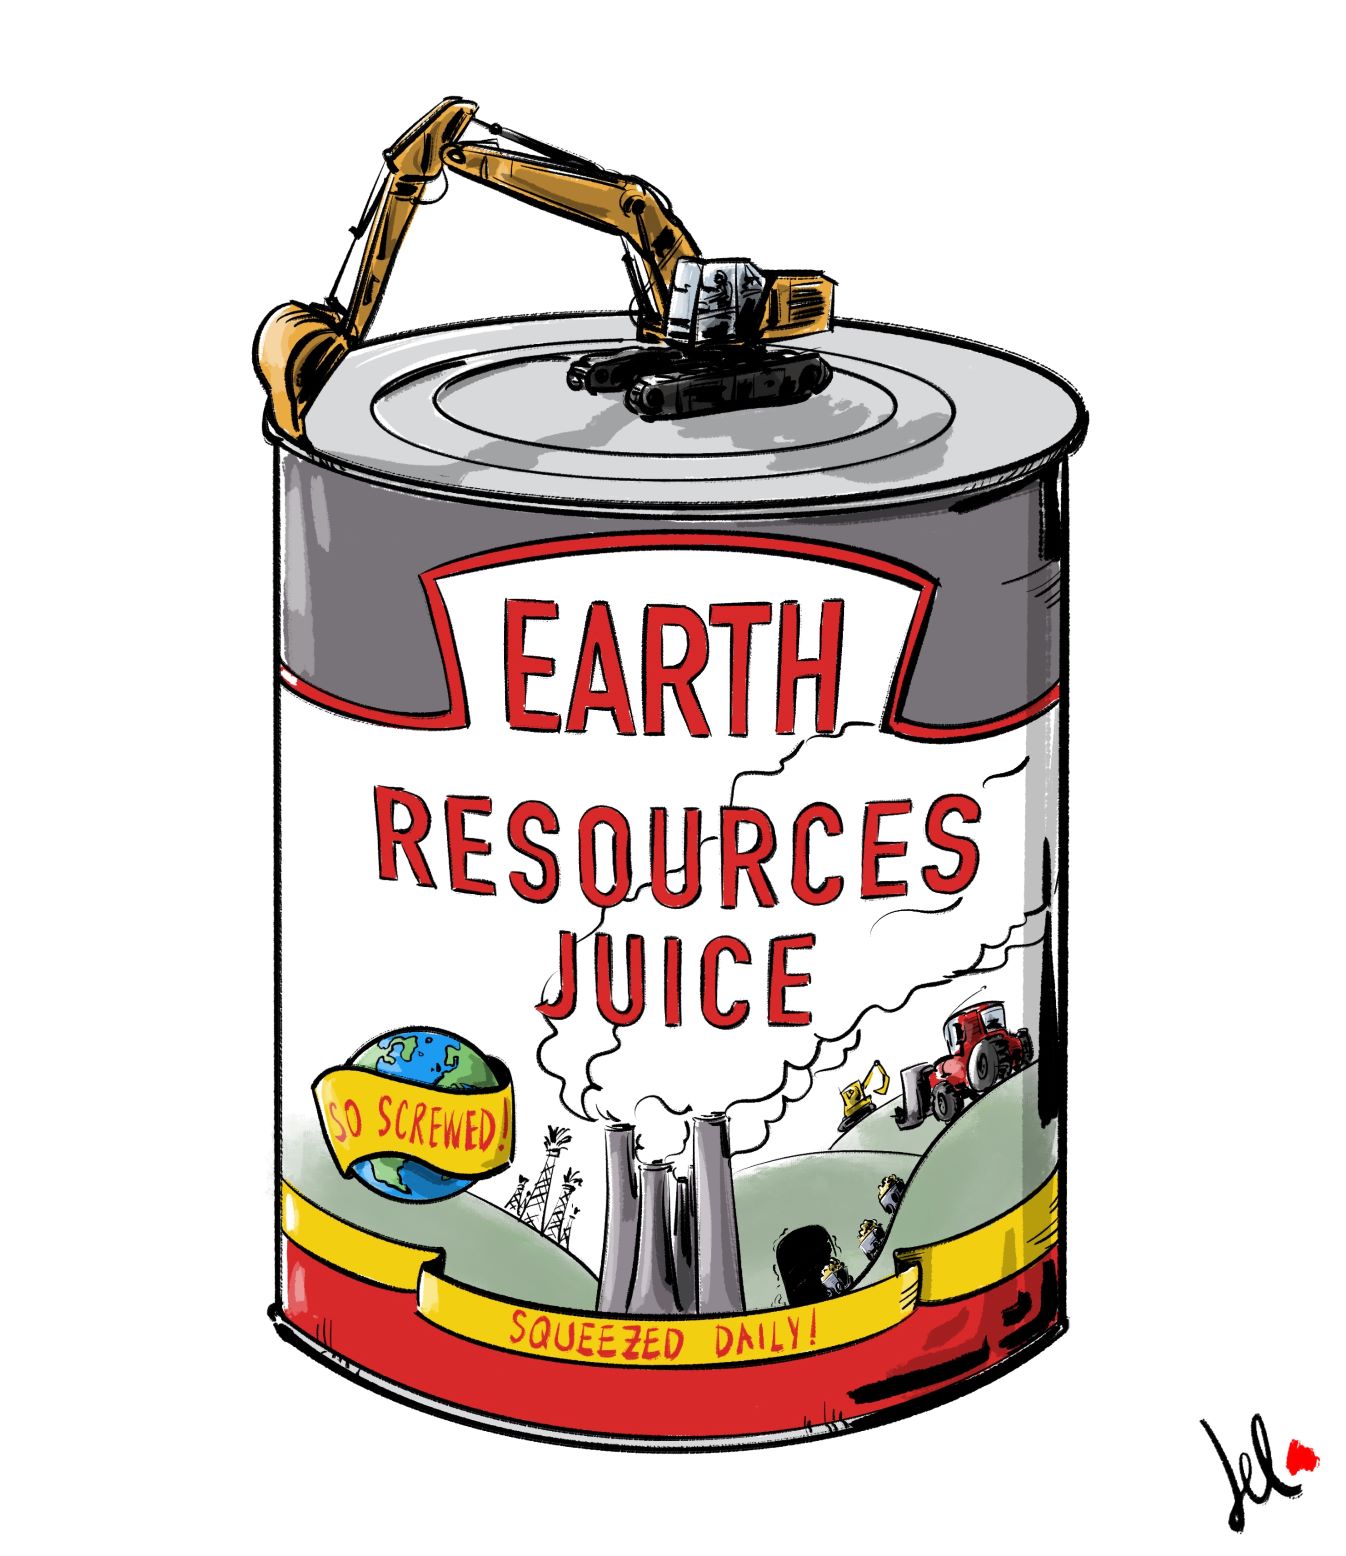 Earth Resources Juice, Emanuele Del Rosso (MR/RM #43)